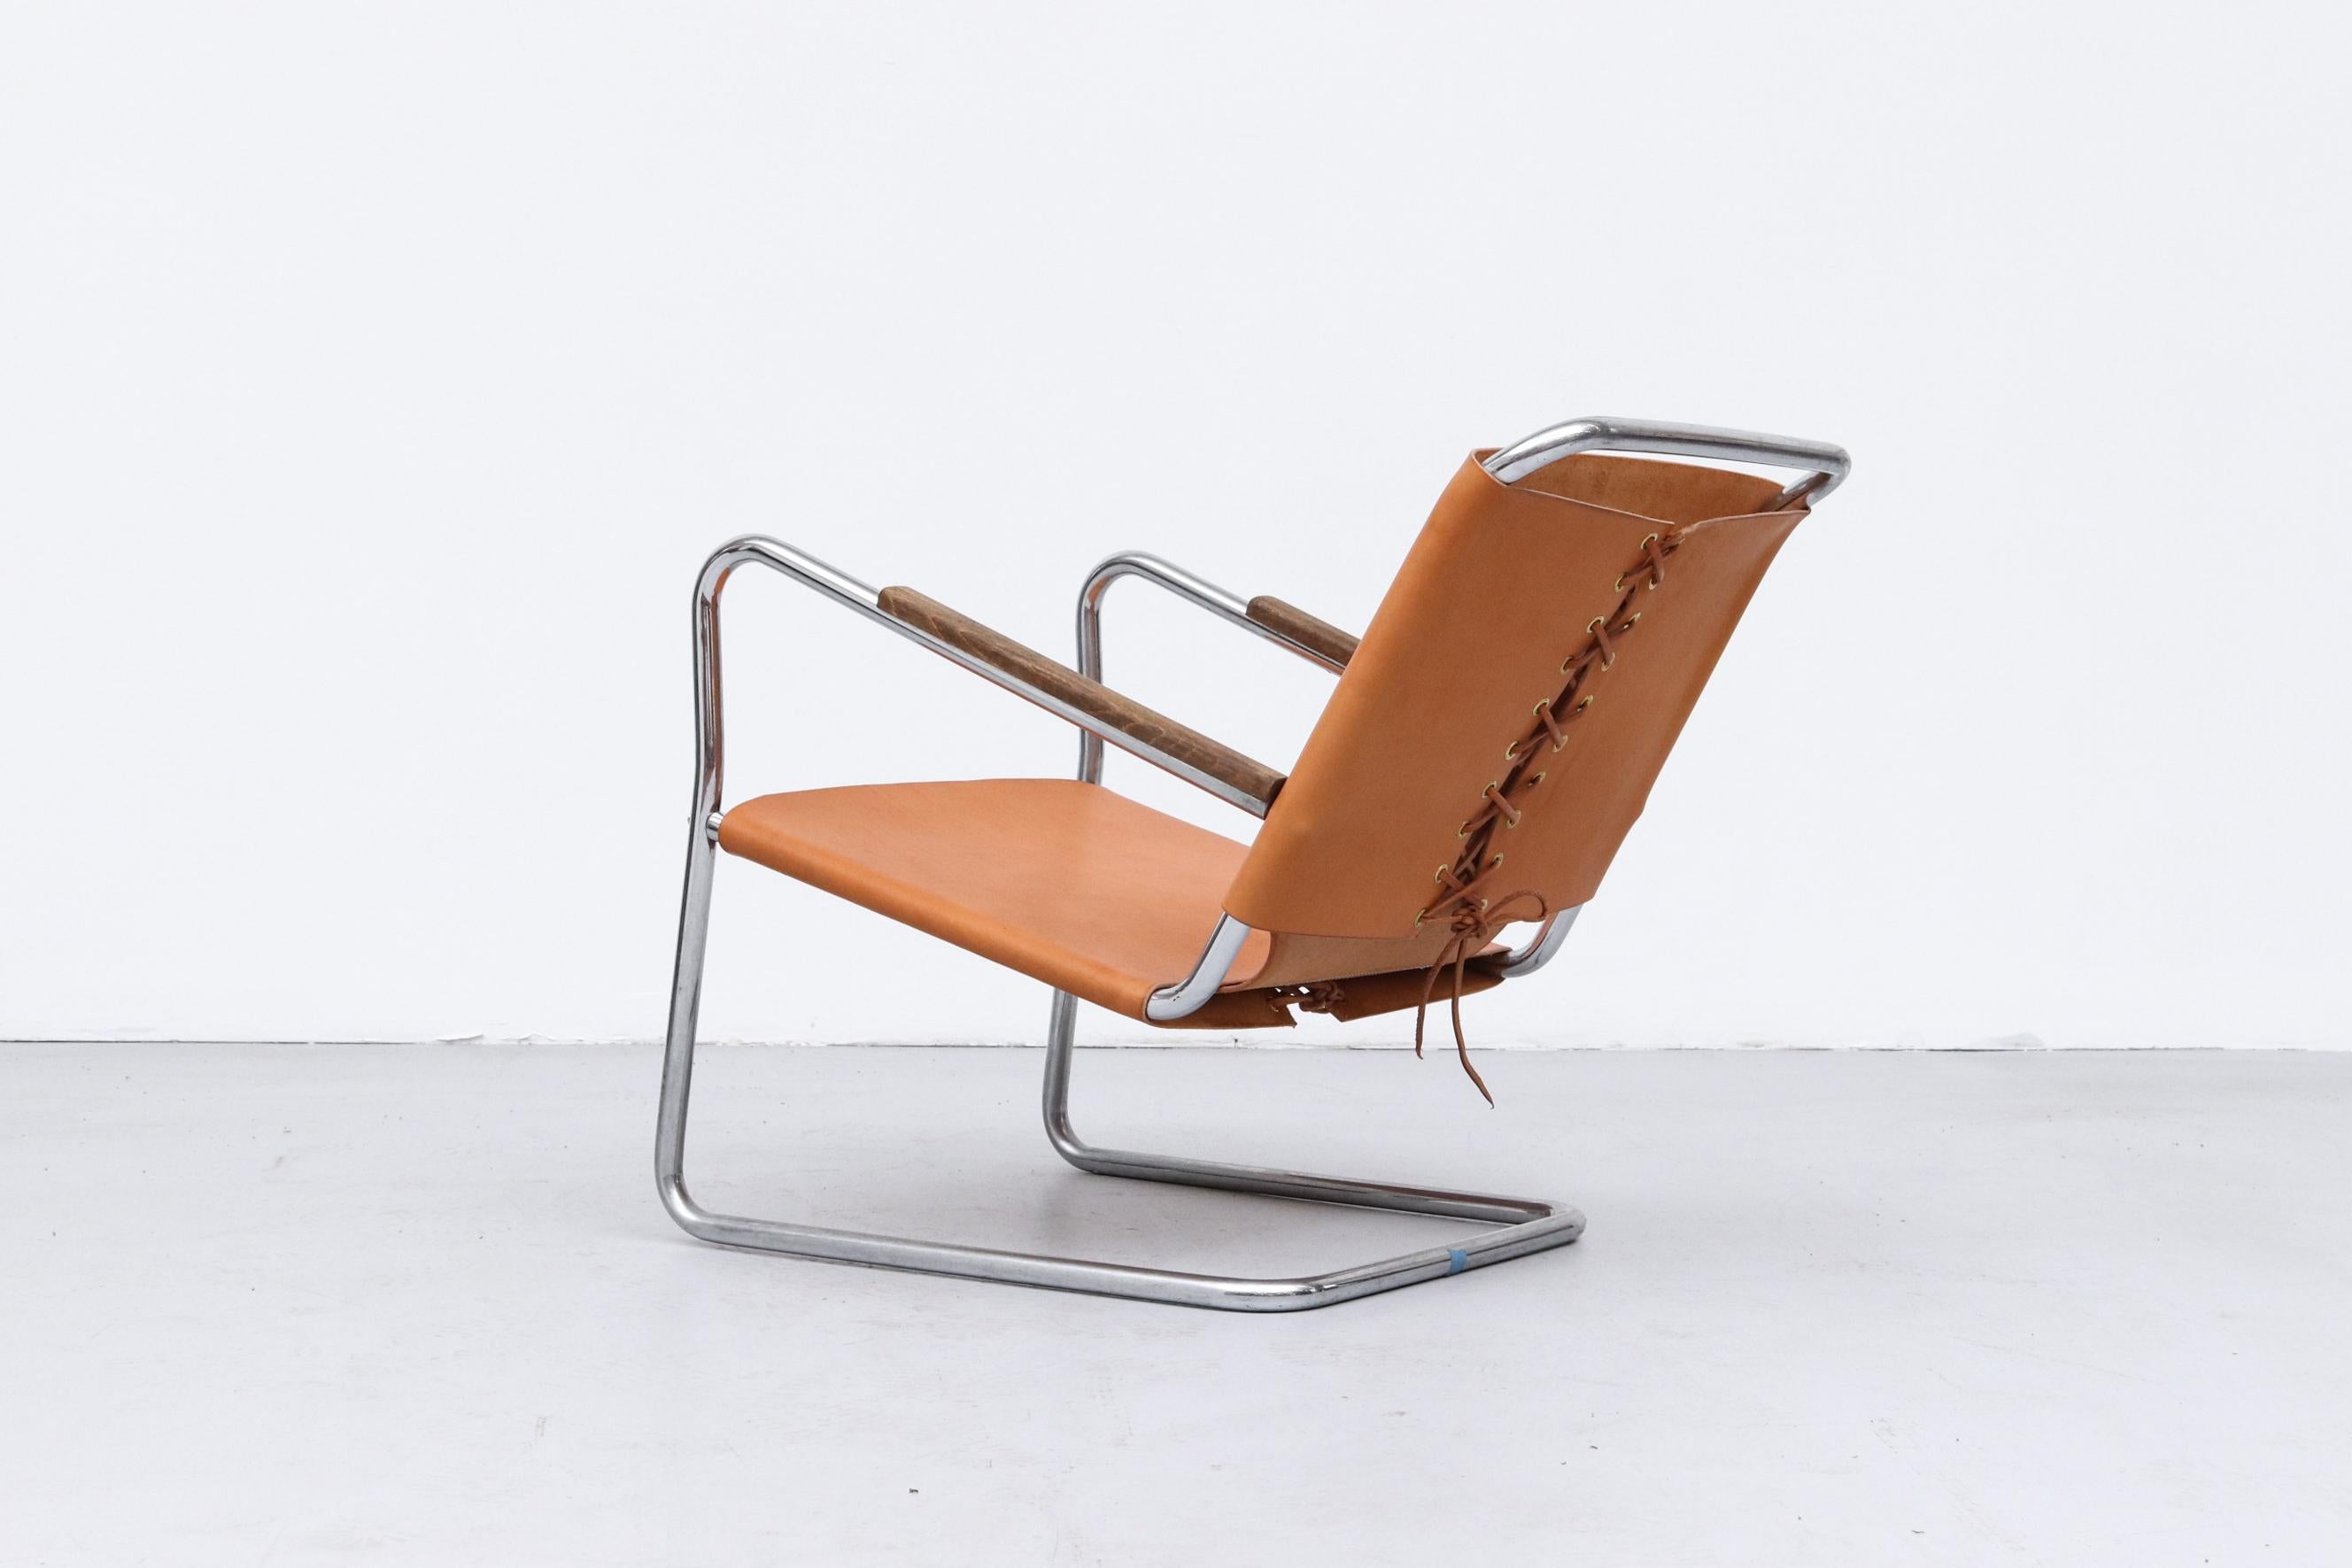 1930s Bas Van Pelt Leather and Chrome Tubular Lounge Chair with Wood Armrests For Sale 1